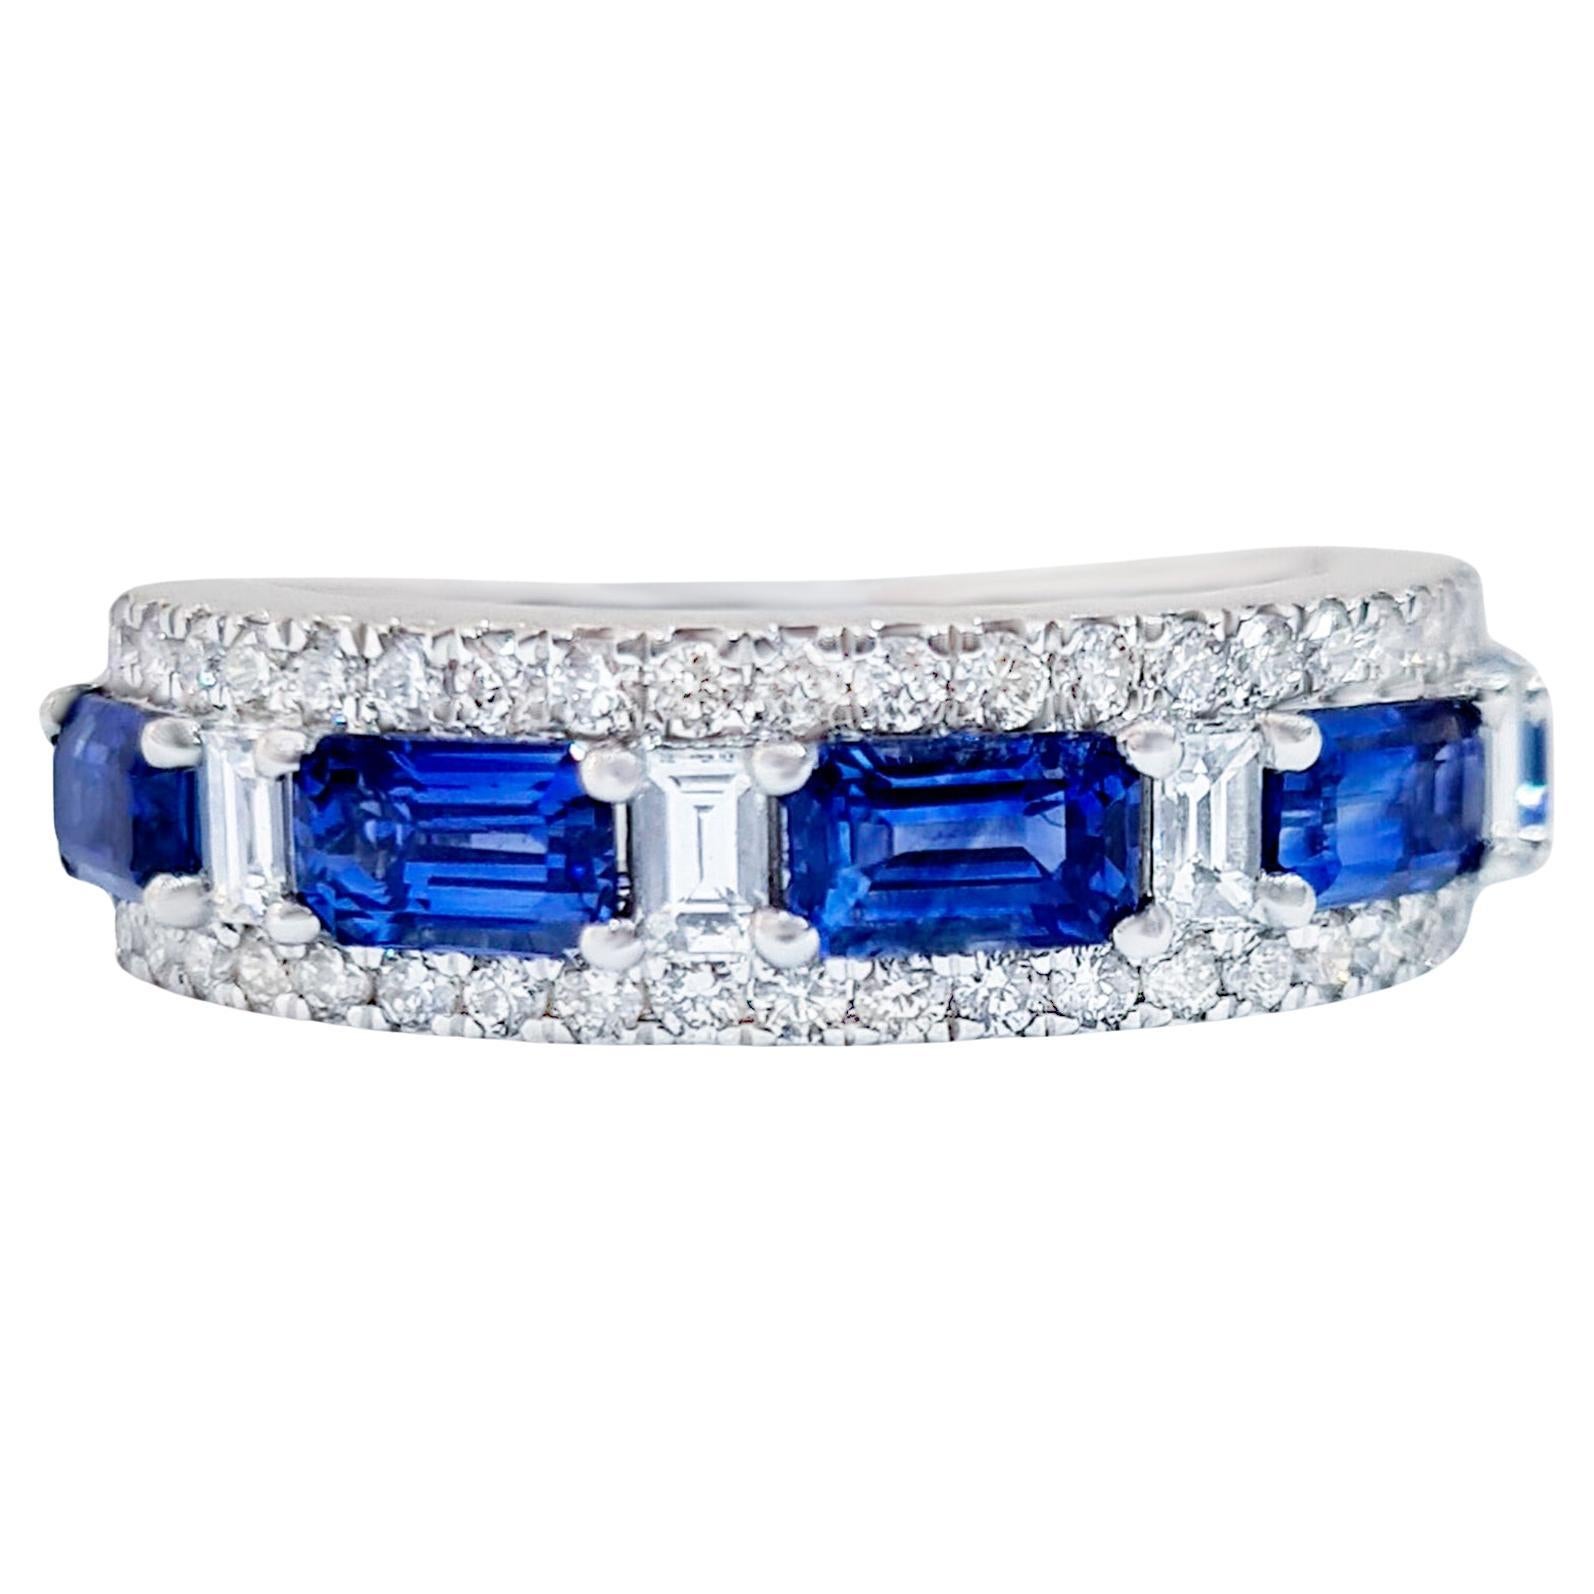 Blue Sapphire Ring With Diamonds 2.77 Carats 18K White Gold For Sale